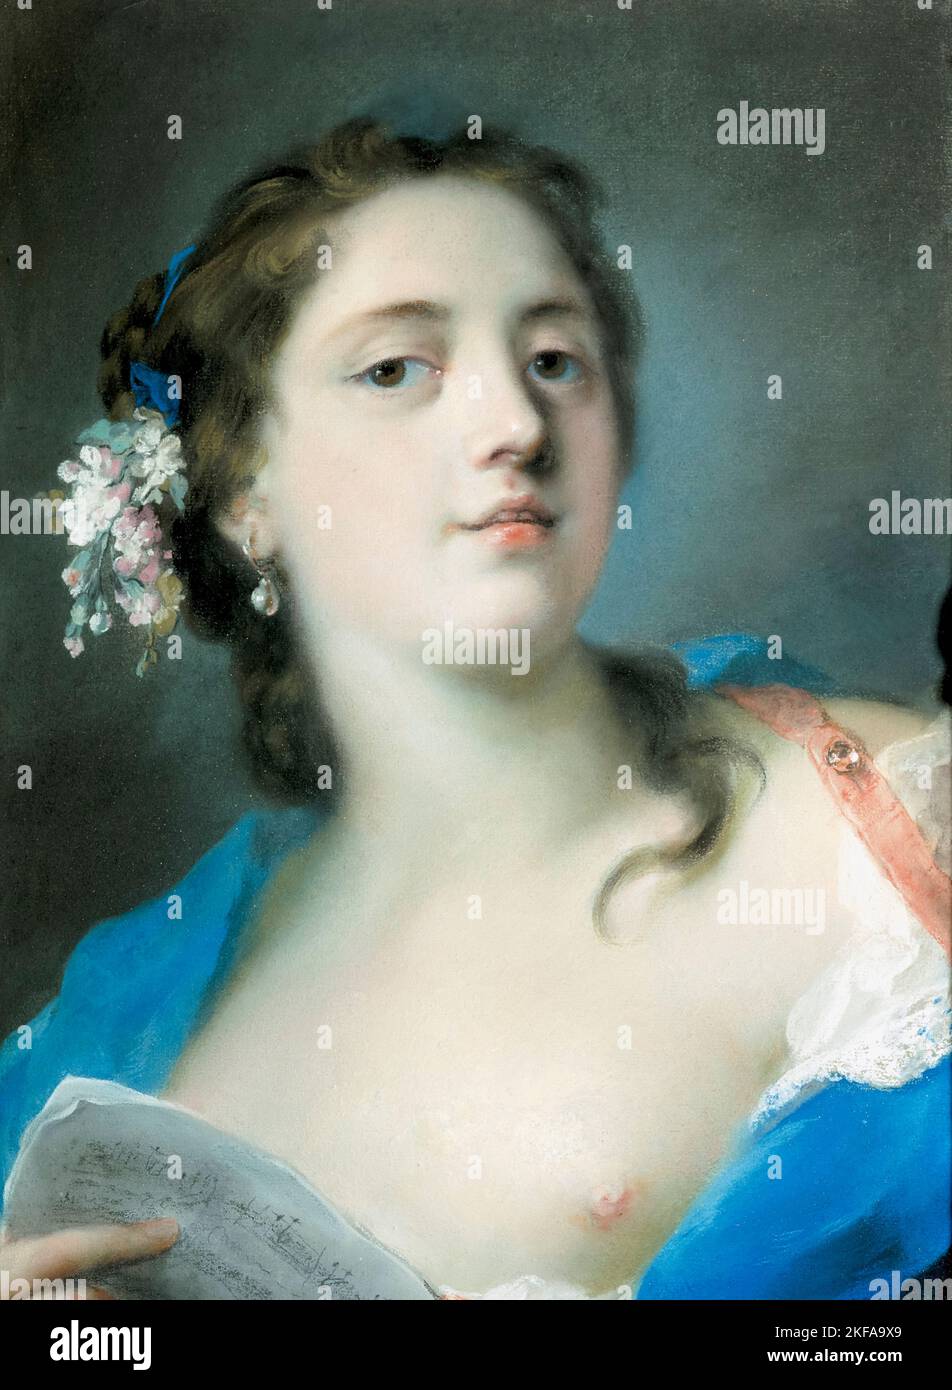 The Singer Faustina Bordoni (1697-1781) with a Musical Score, portrait painting in pastel by Rosalba Carriera, 1724-1725 Stock Photo